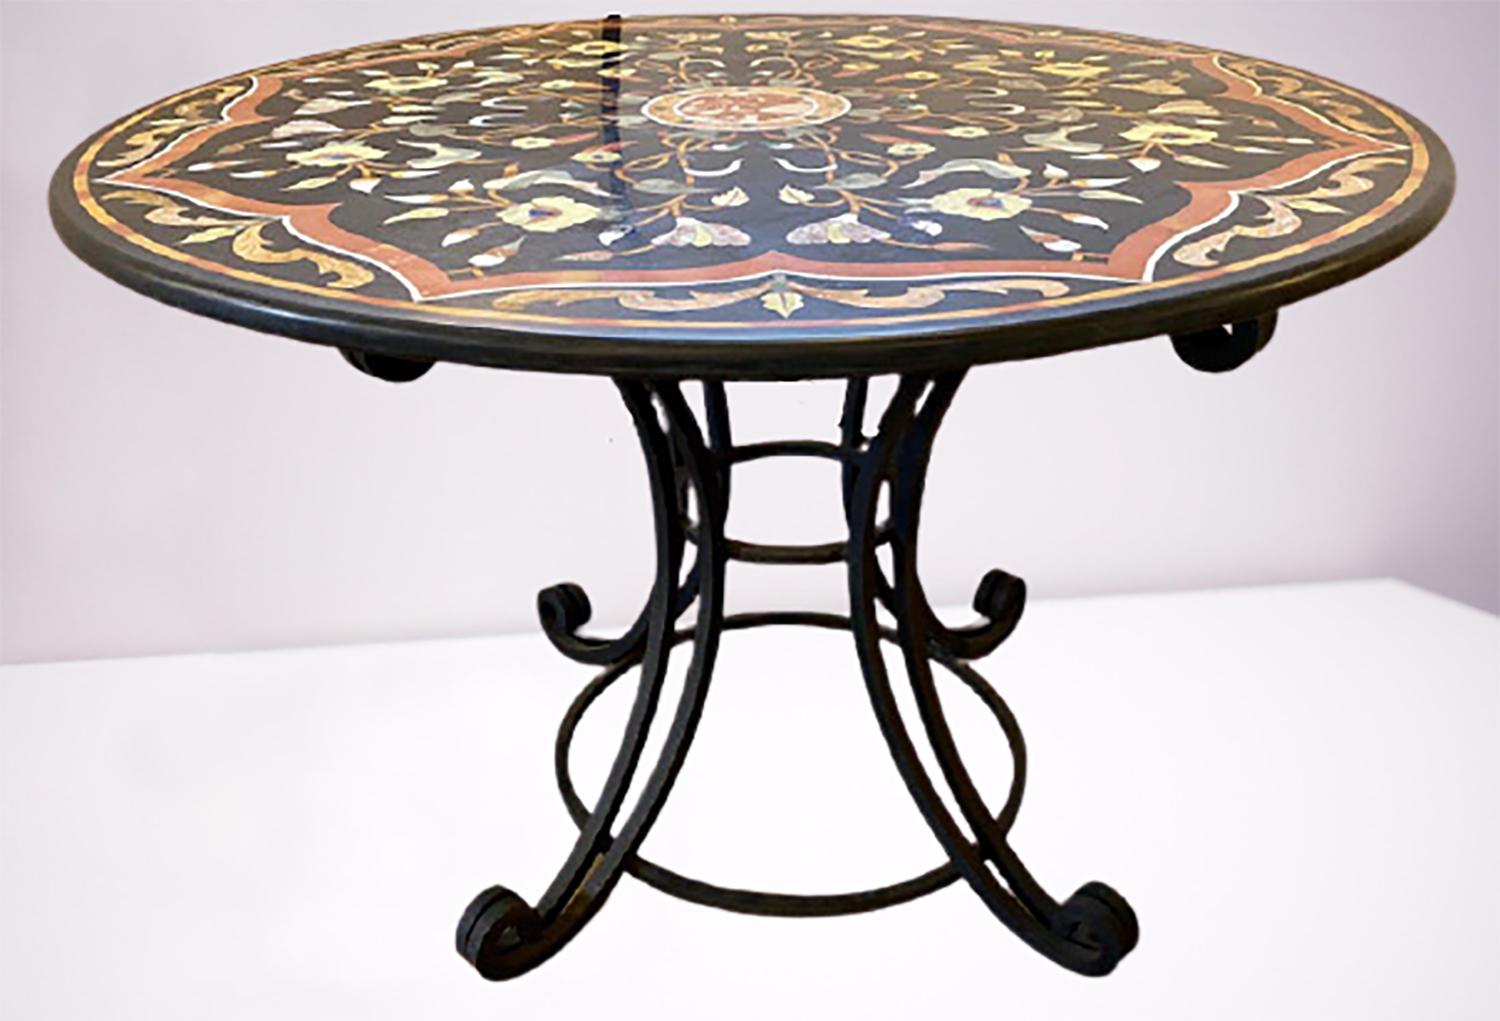 Pietra Dura stone inlaid round center dining table. Having a wrought iron table base this antique centre table is not a reproduction rather a good old one with hand details and a very solid and sturdy table base.